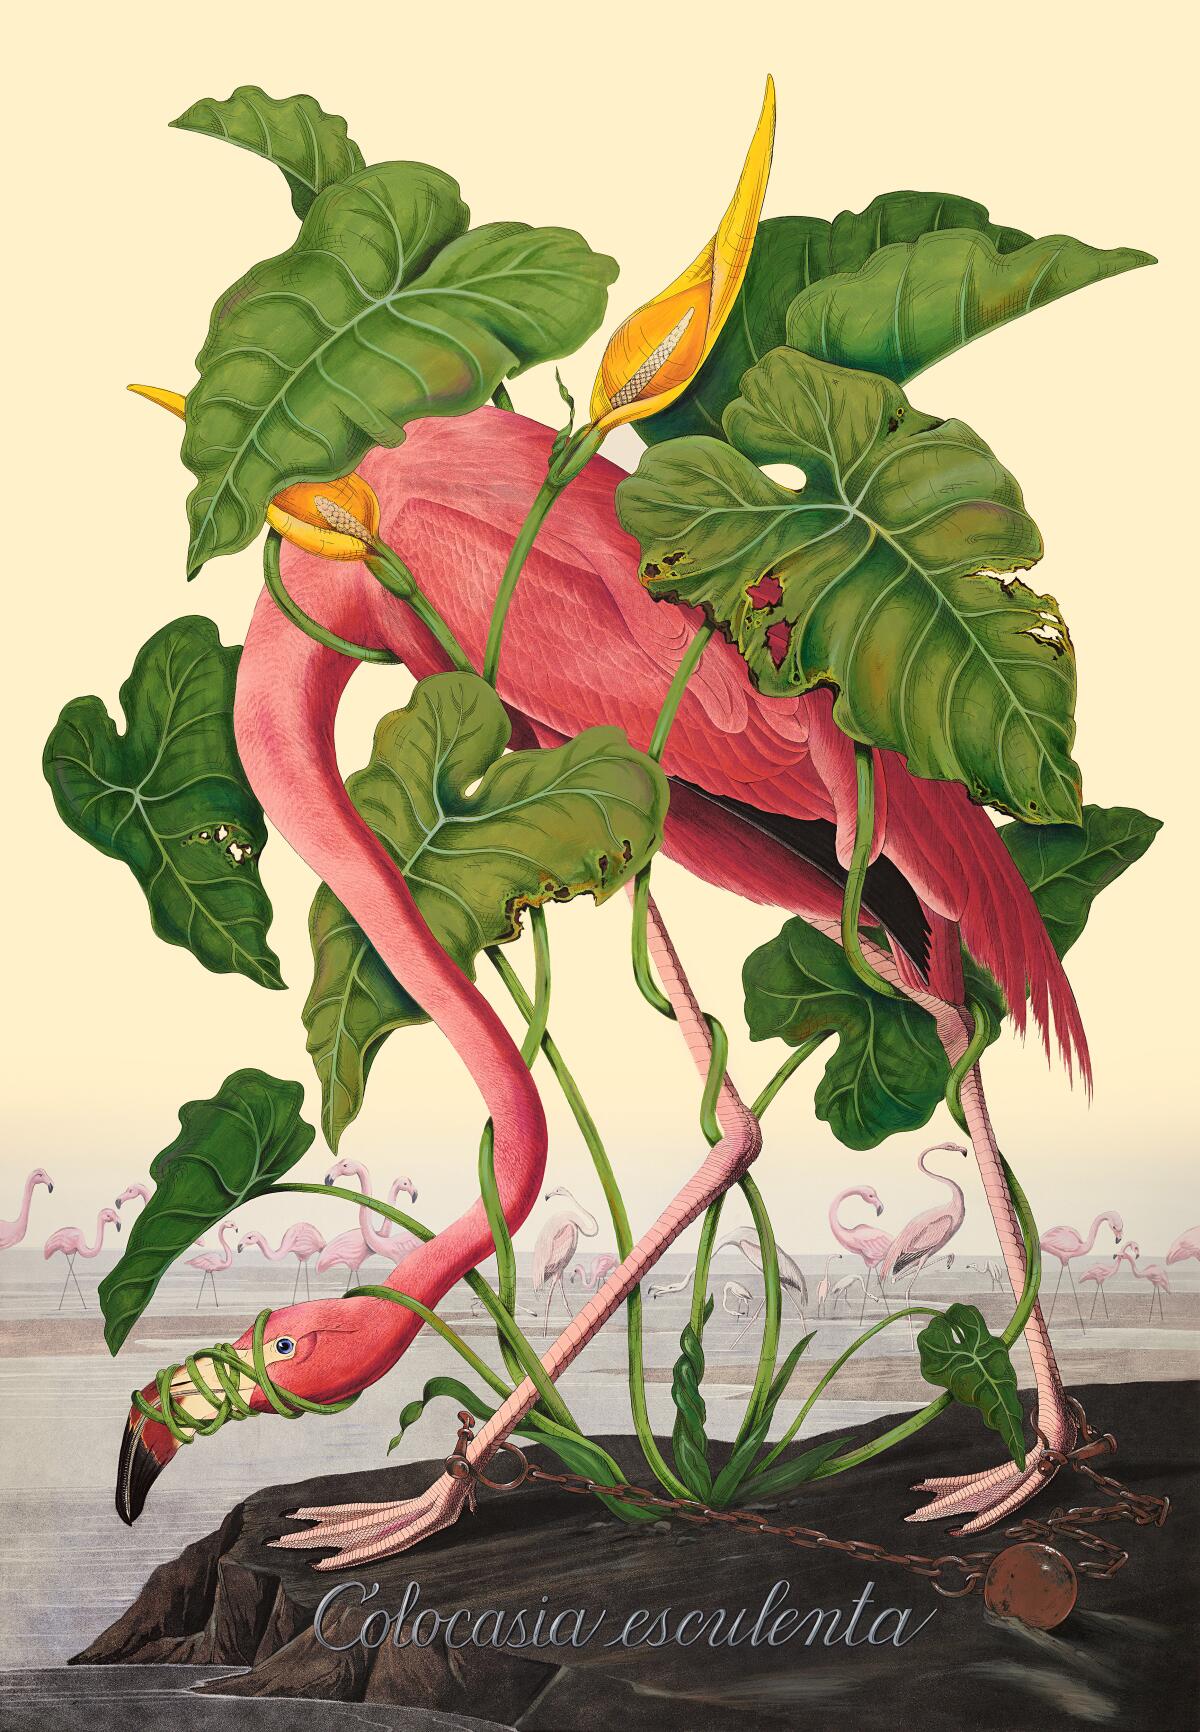 An image of a flamingo tangled in palm leaves.